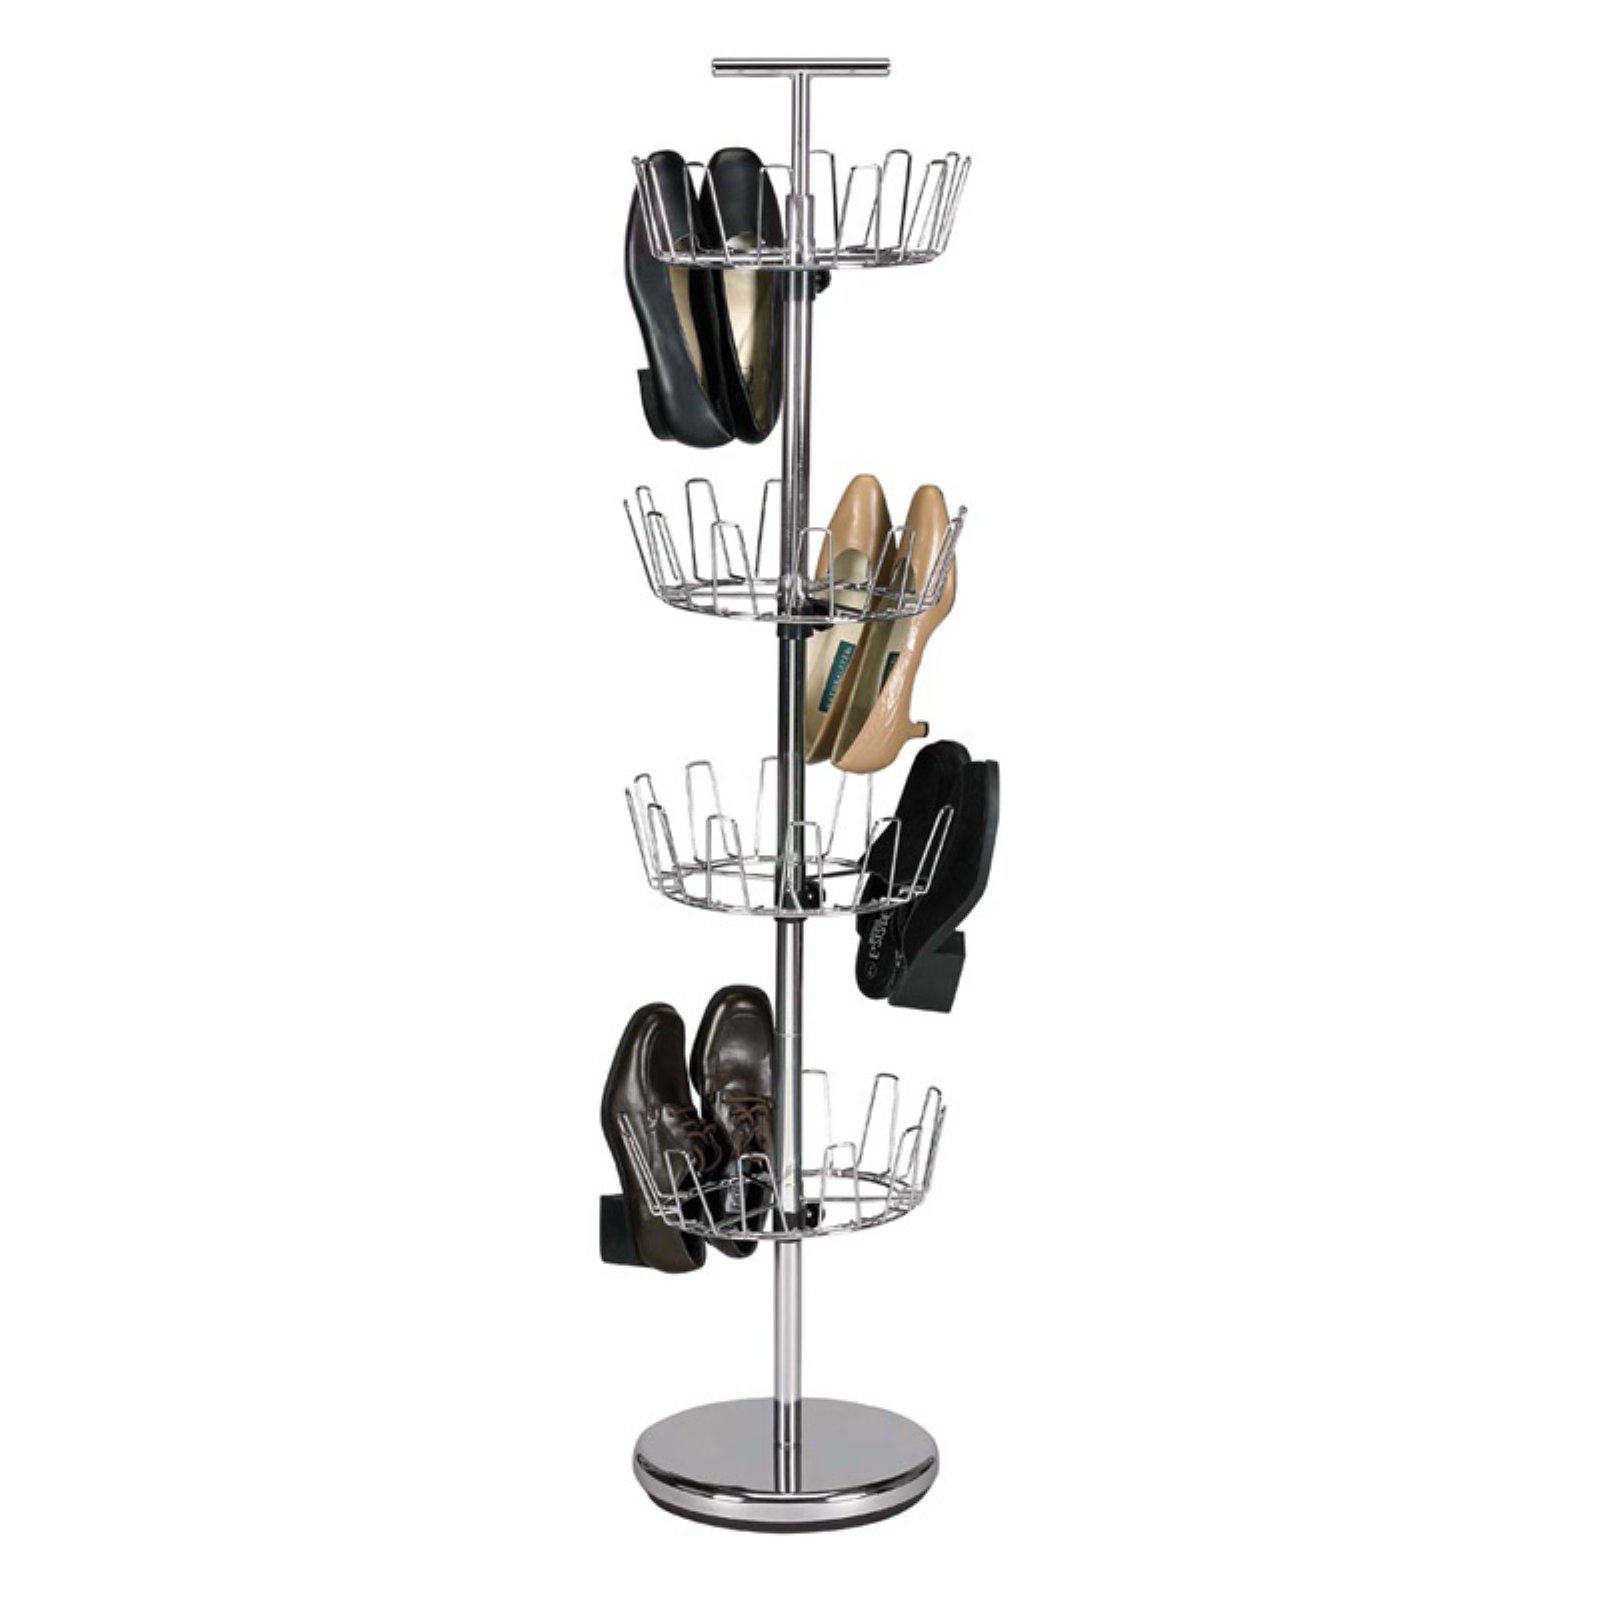 Household Essentials 4-Tier Revolving Shoe Tree, Silver - image 1 of 2